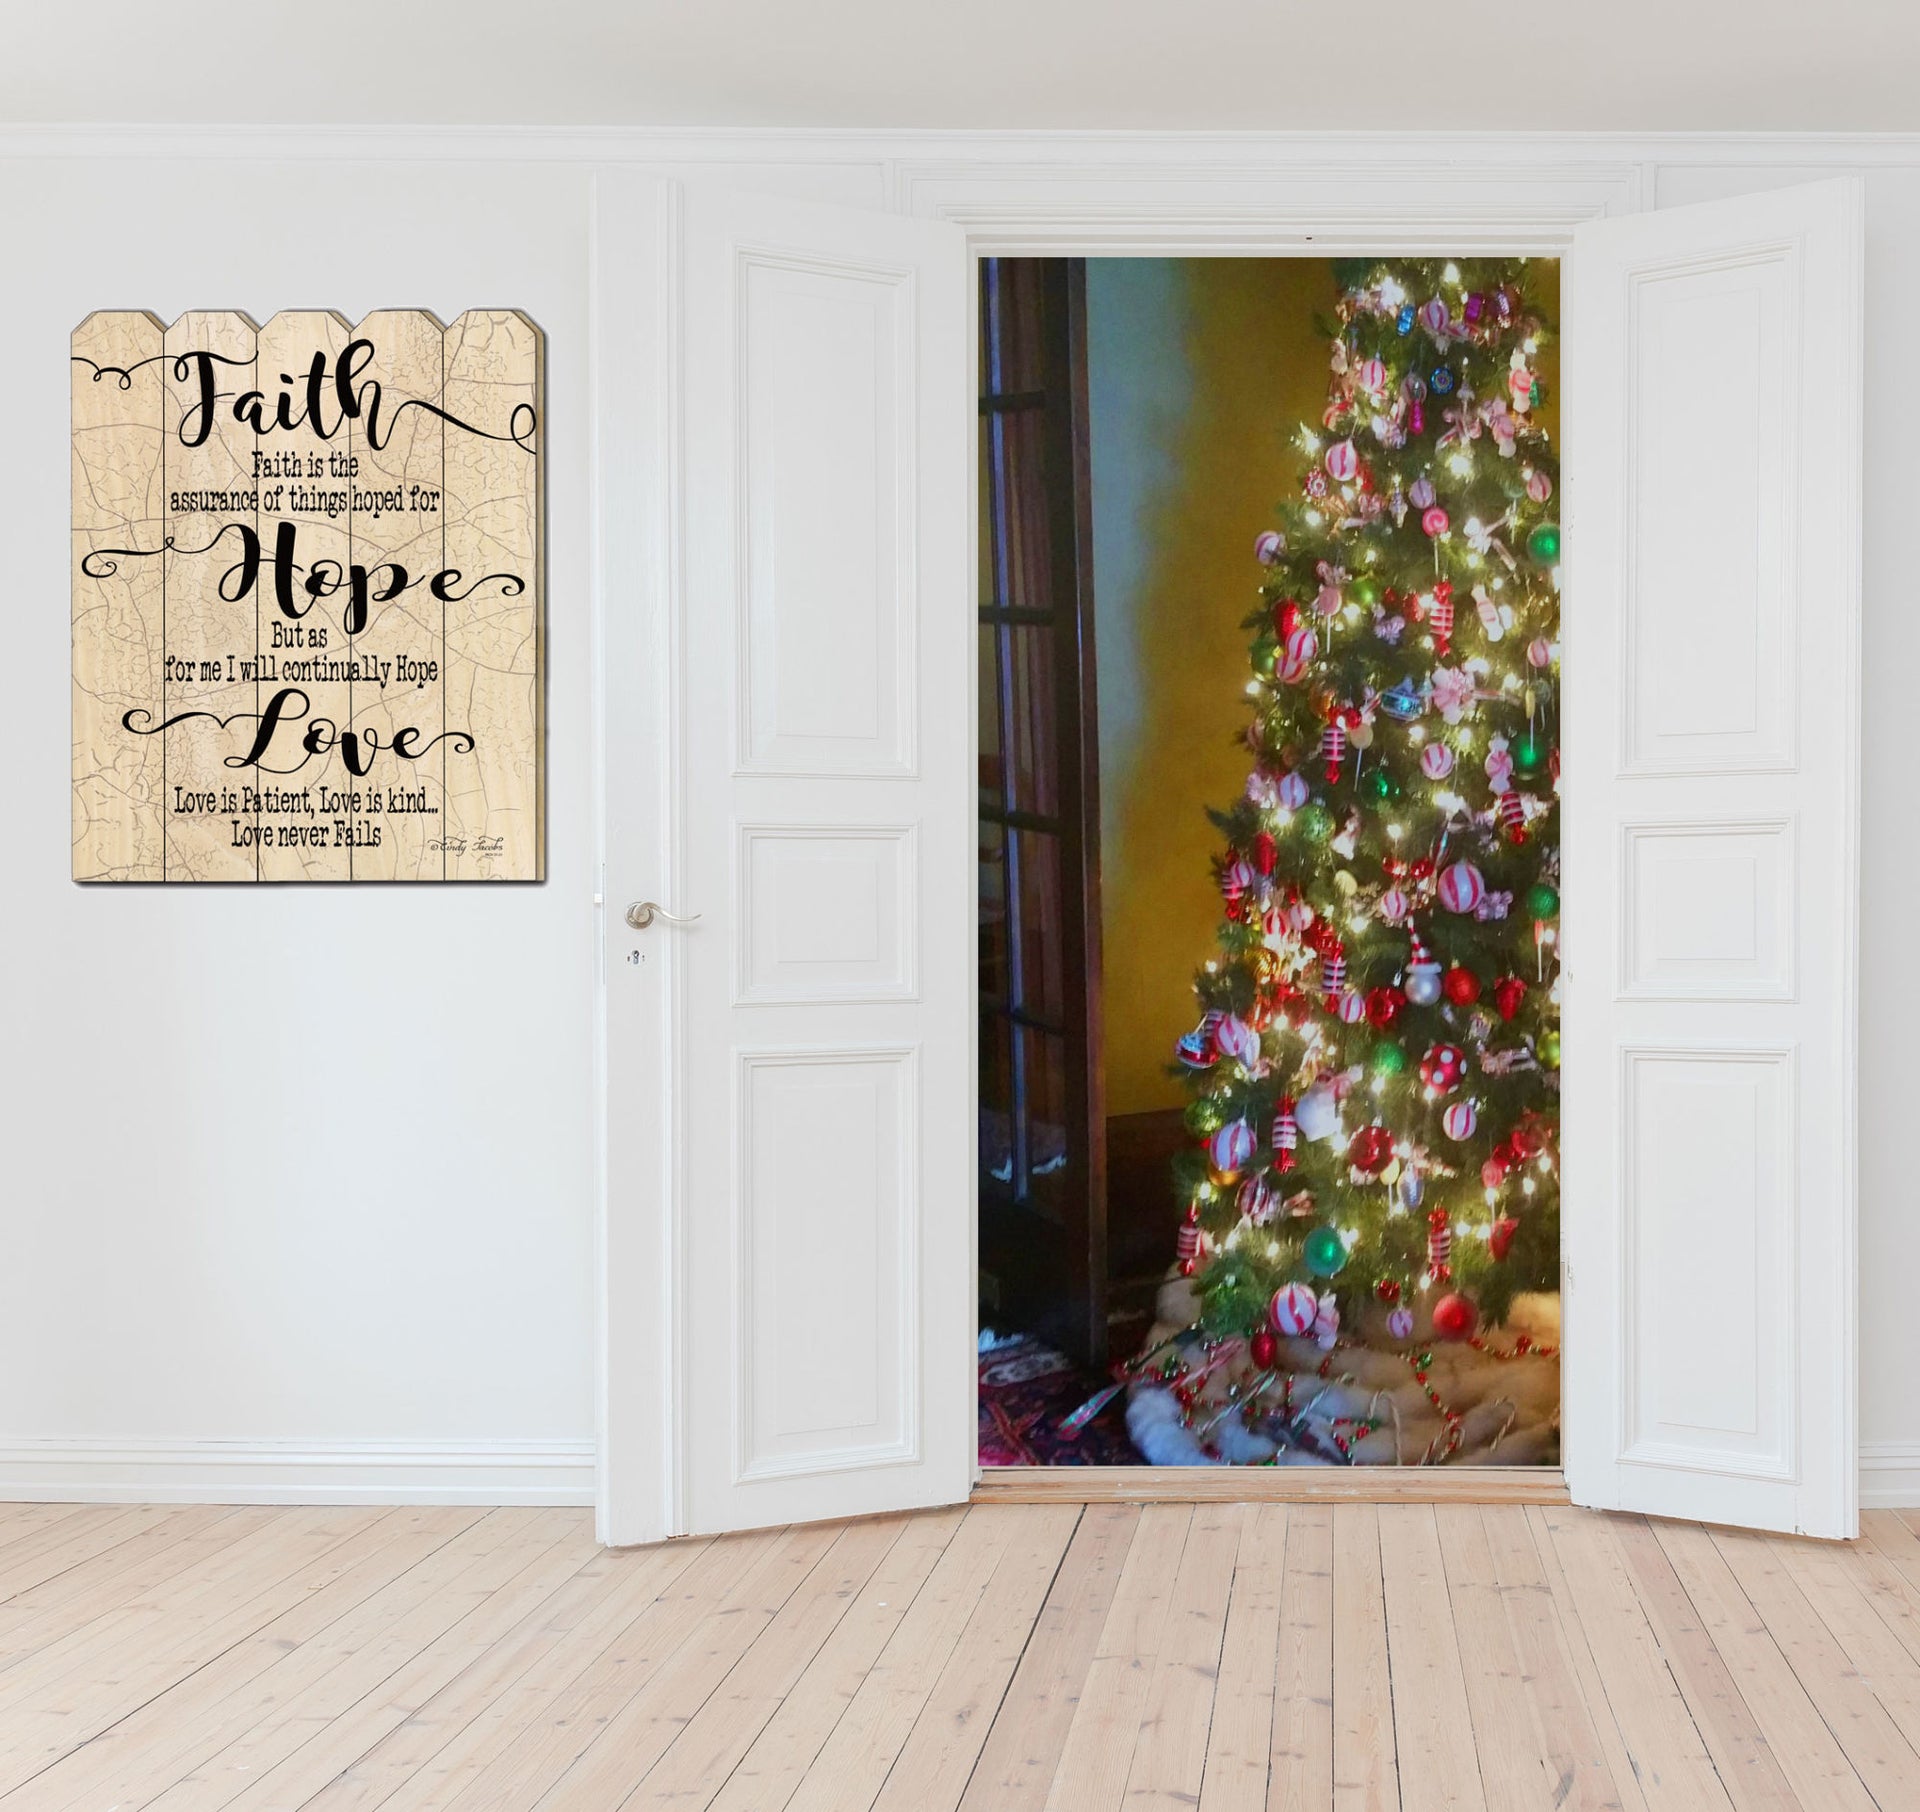 "Faith Hope Love" by Cindy Jacobs, Printed Wall Art on a Wood Picket Fence